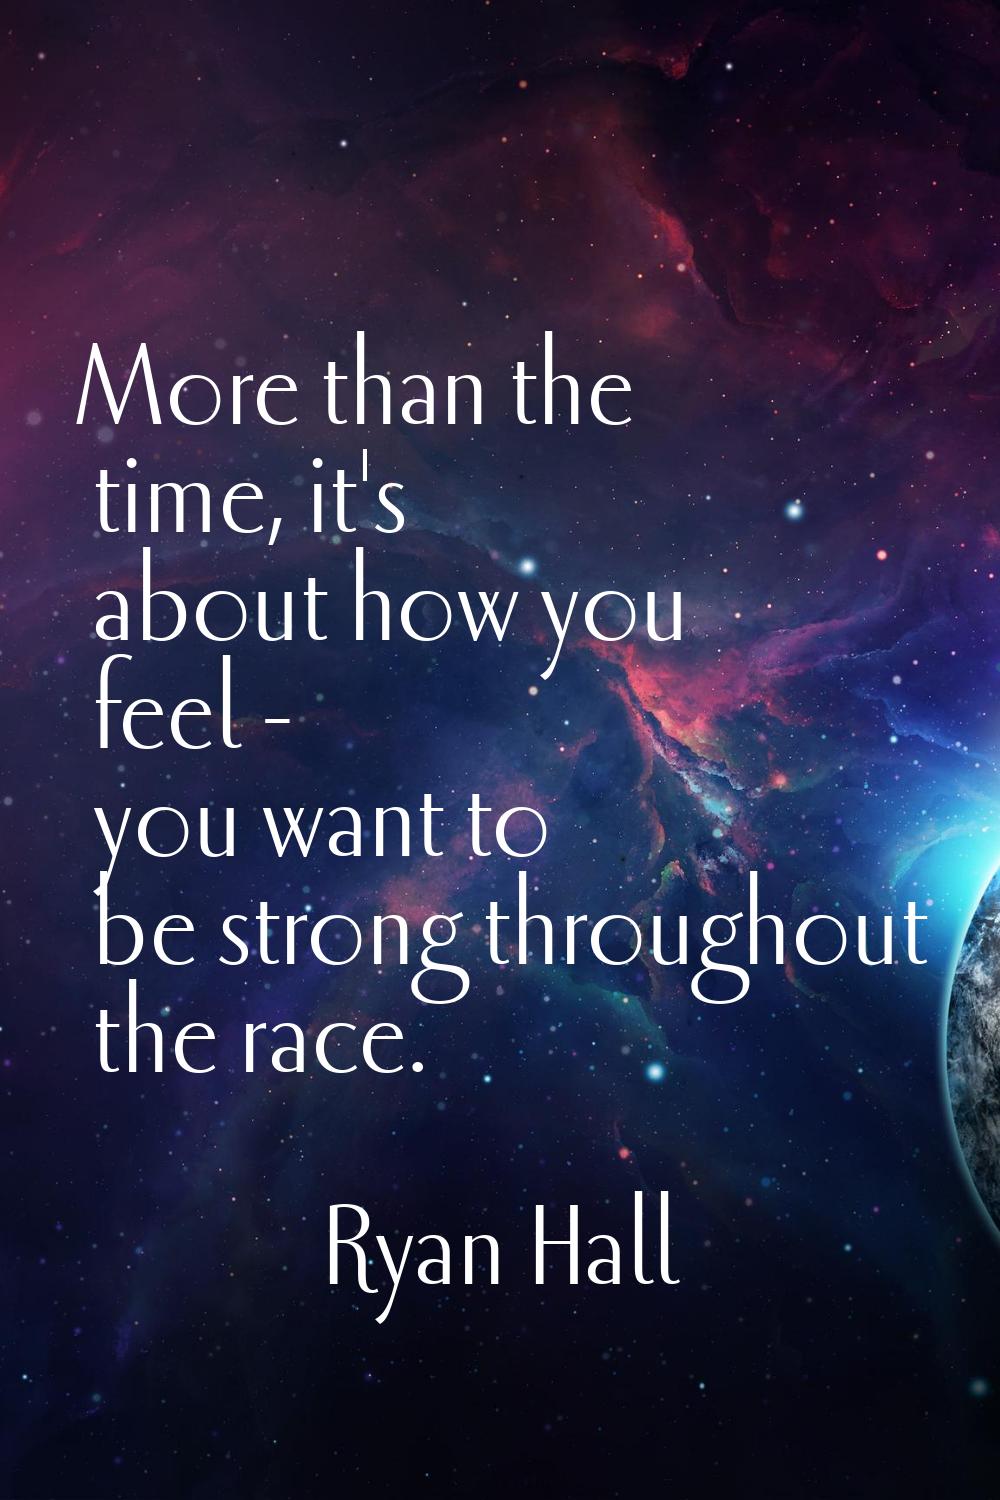 More than the time, it's about how you feel - you want to be strong throughout the race.